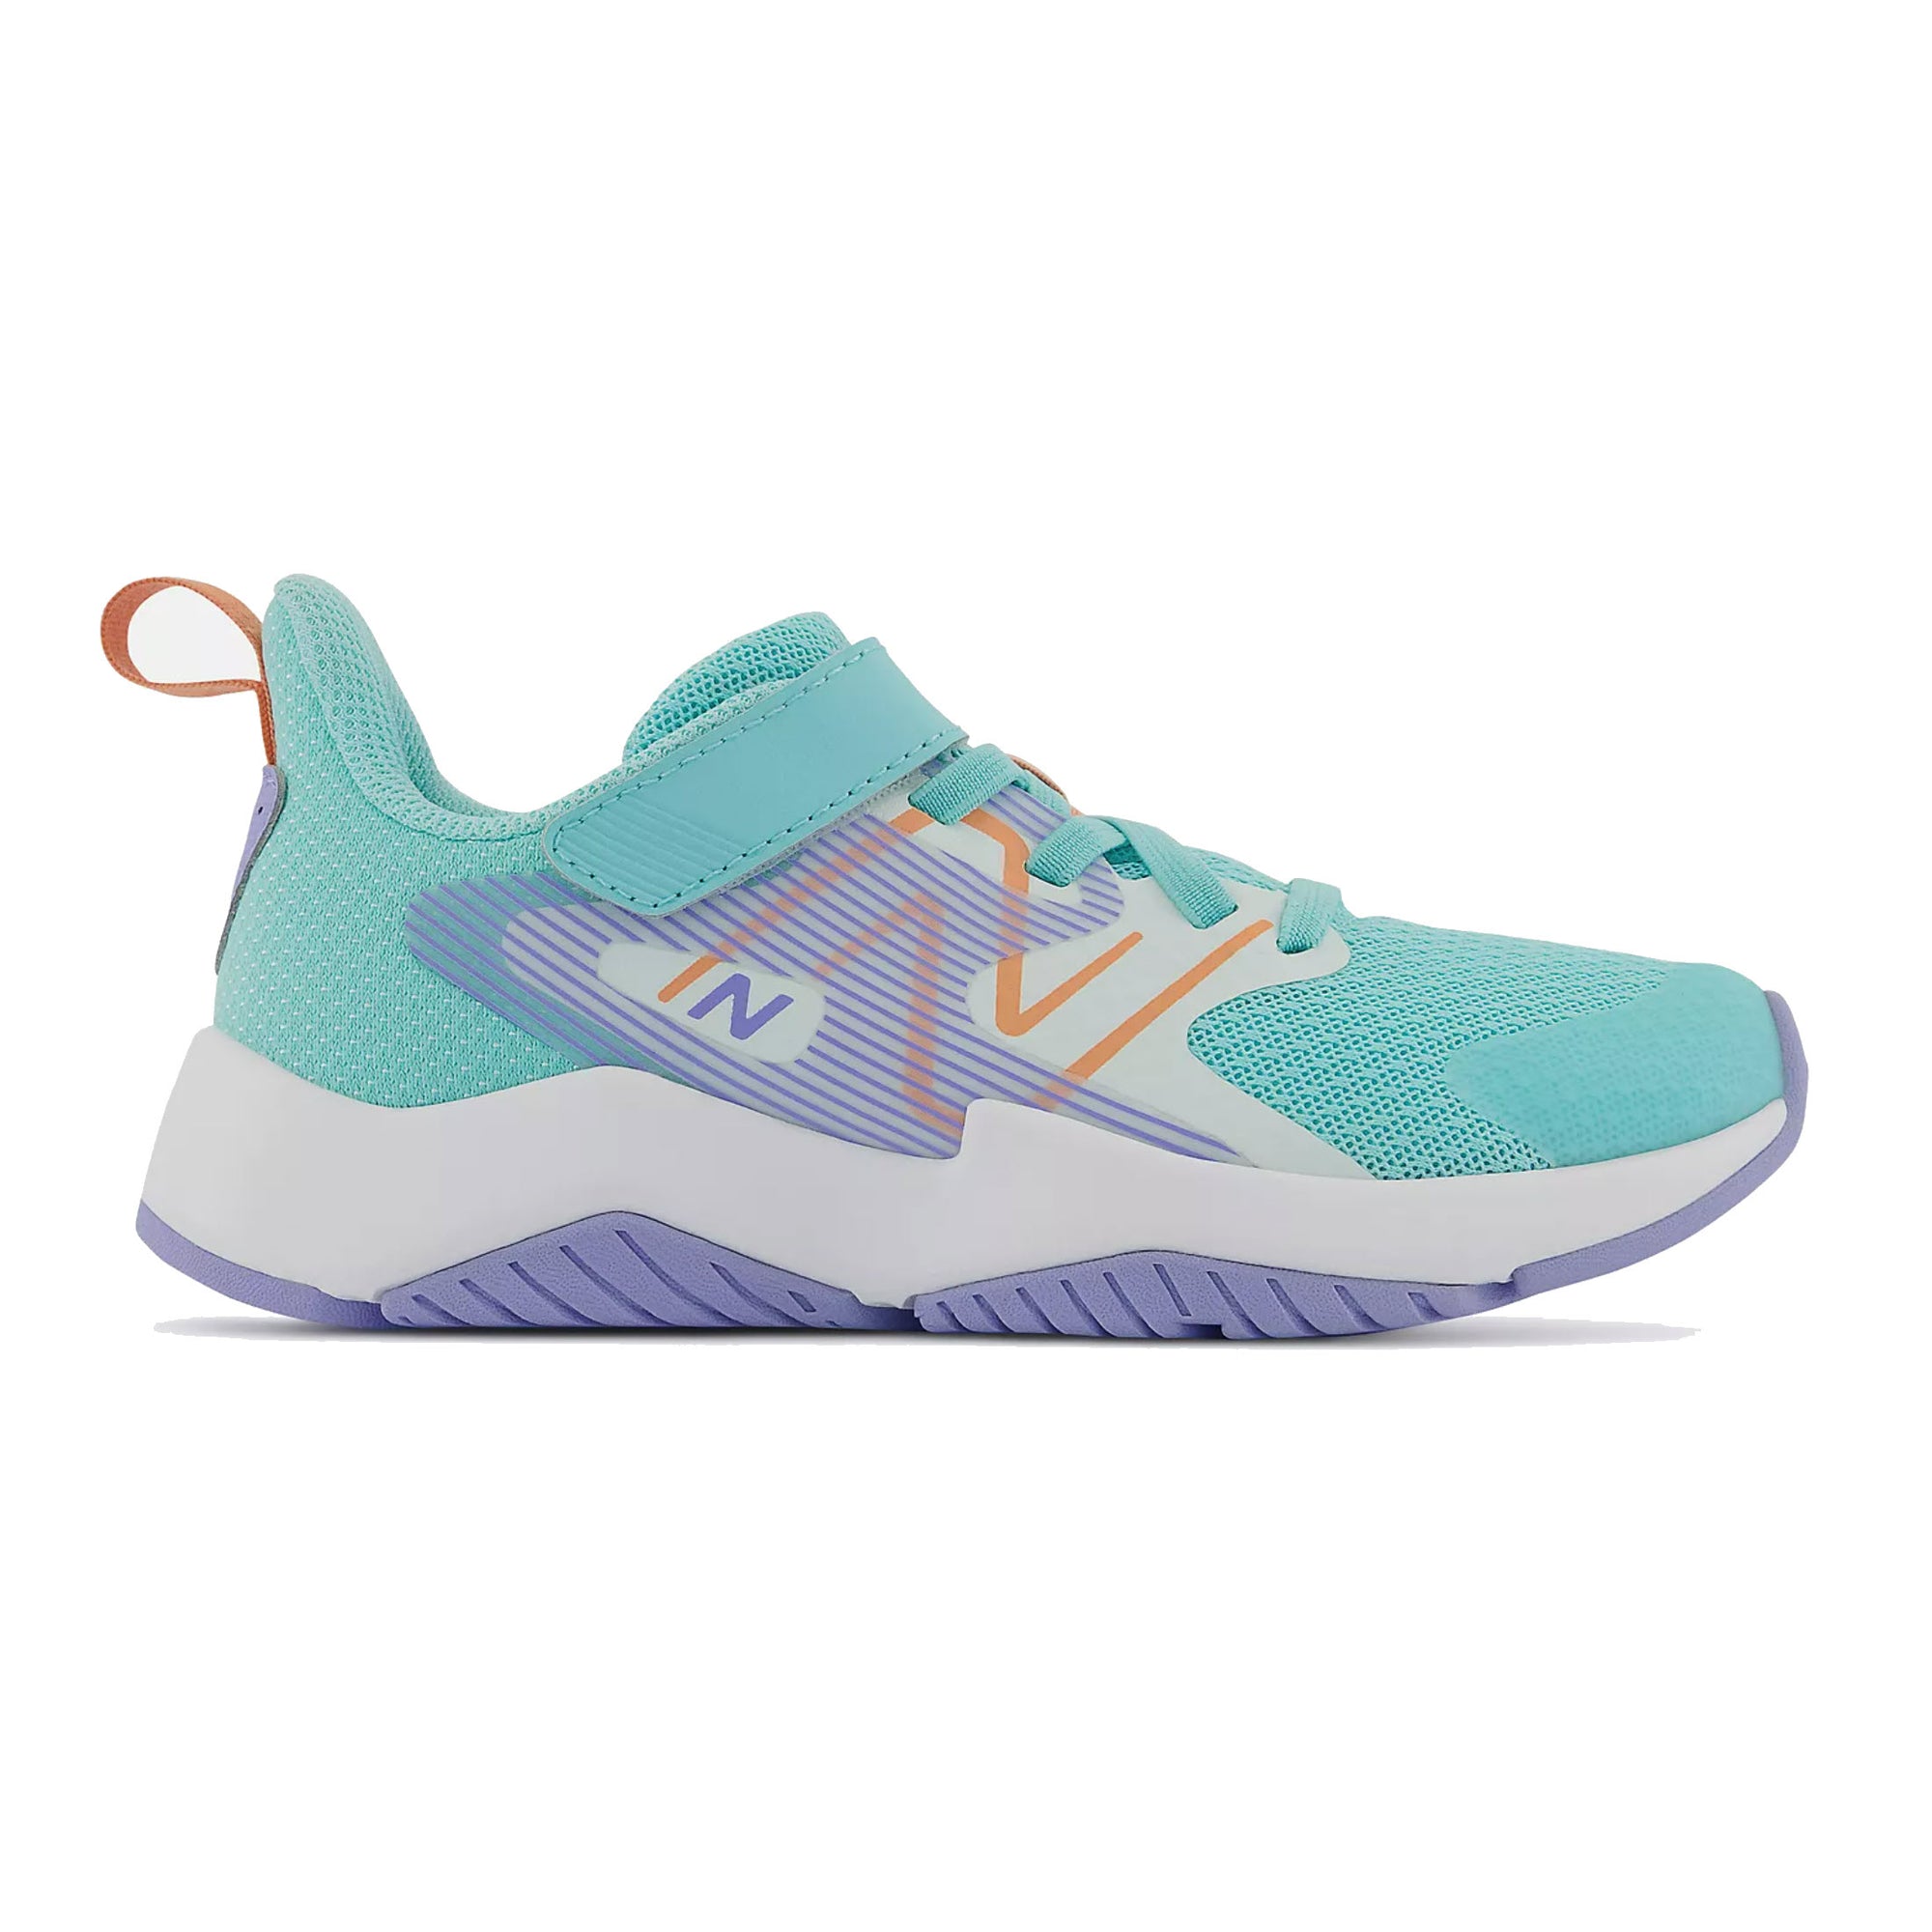 New Balance aqua blue and peach kids' running shoe with "n" logo on the side and a white, breathable upper, in a side profile view.